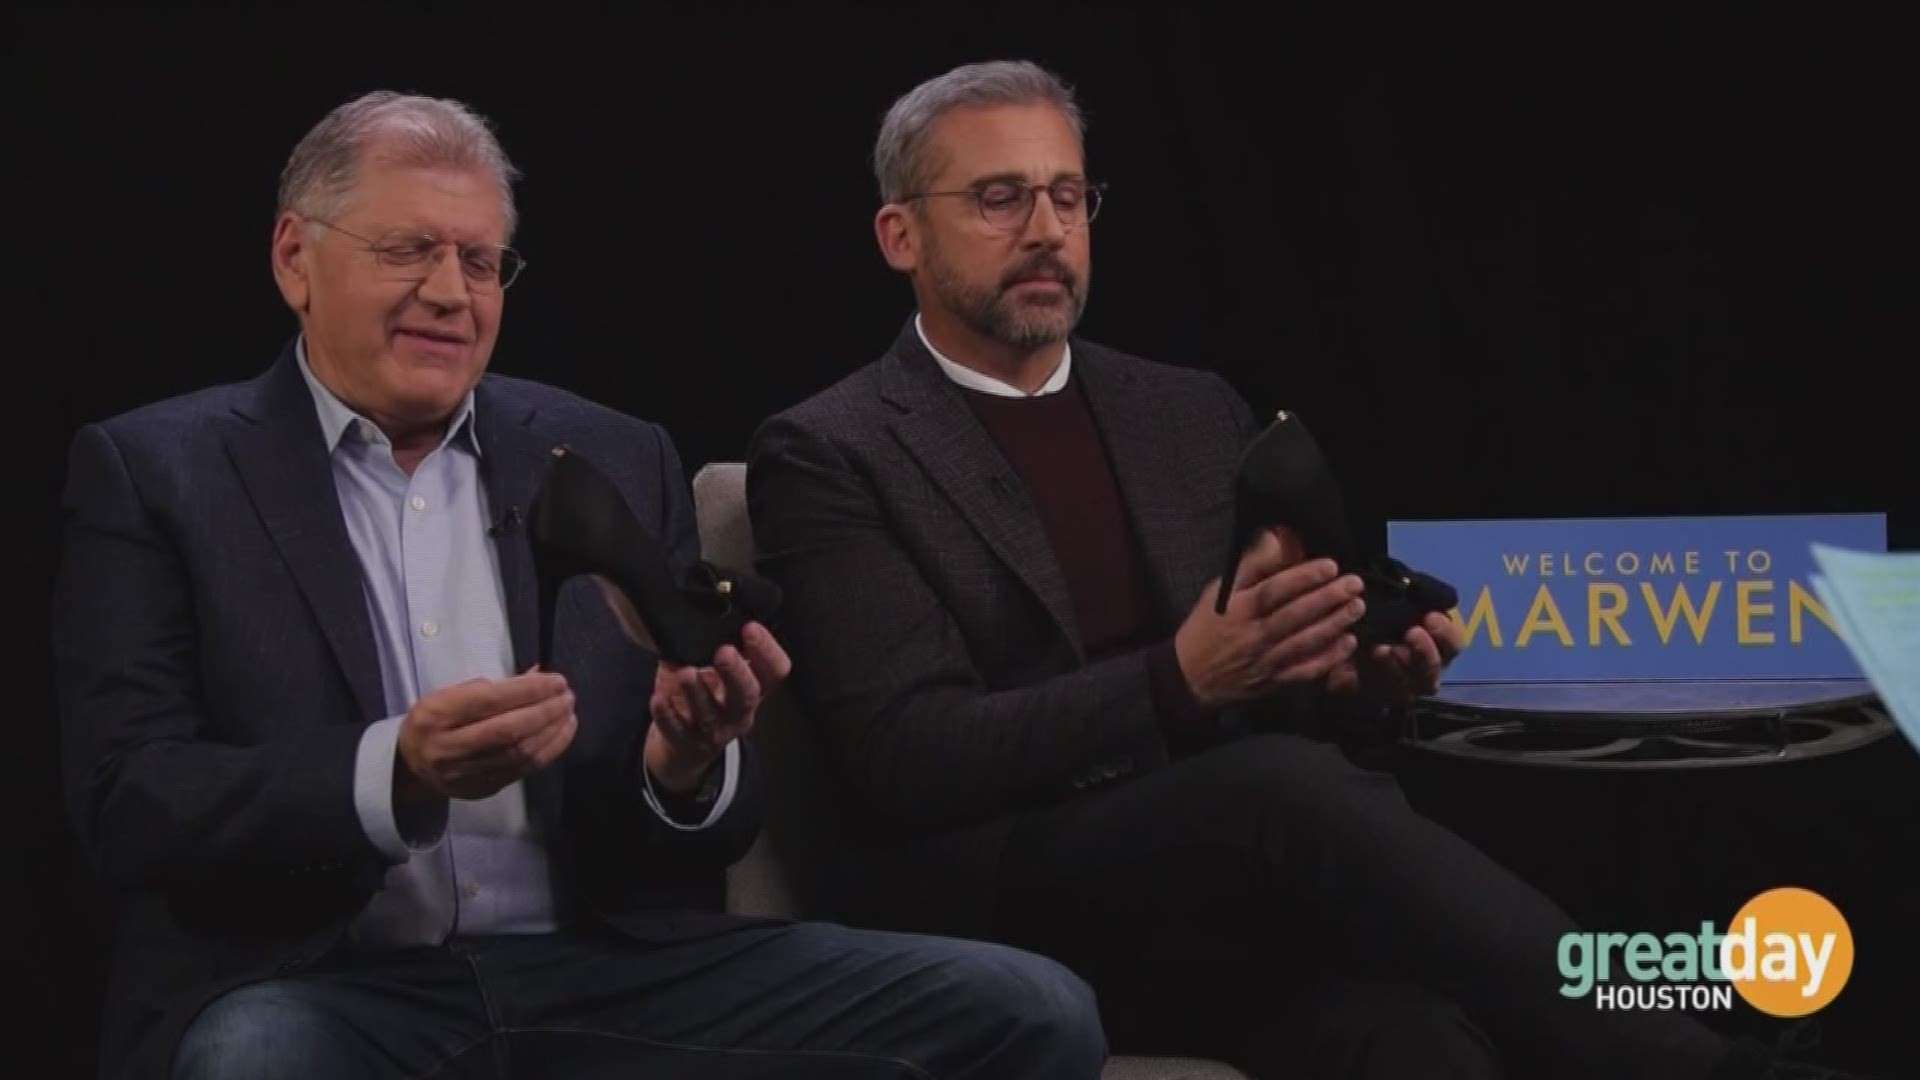 New film, Welcome to Marwen, is out in theaters this Friday and has everyone buzzing.  Great Day's Cristina Kooker sat down with Director, Robert Zemeckis and the most-loved actor in Hollywood, Steve Carell.